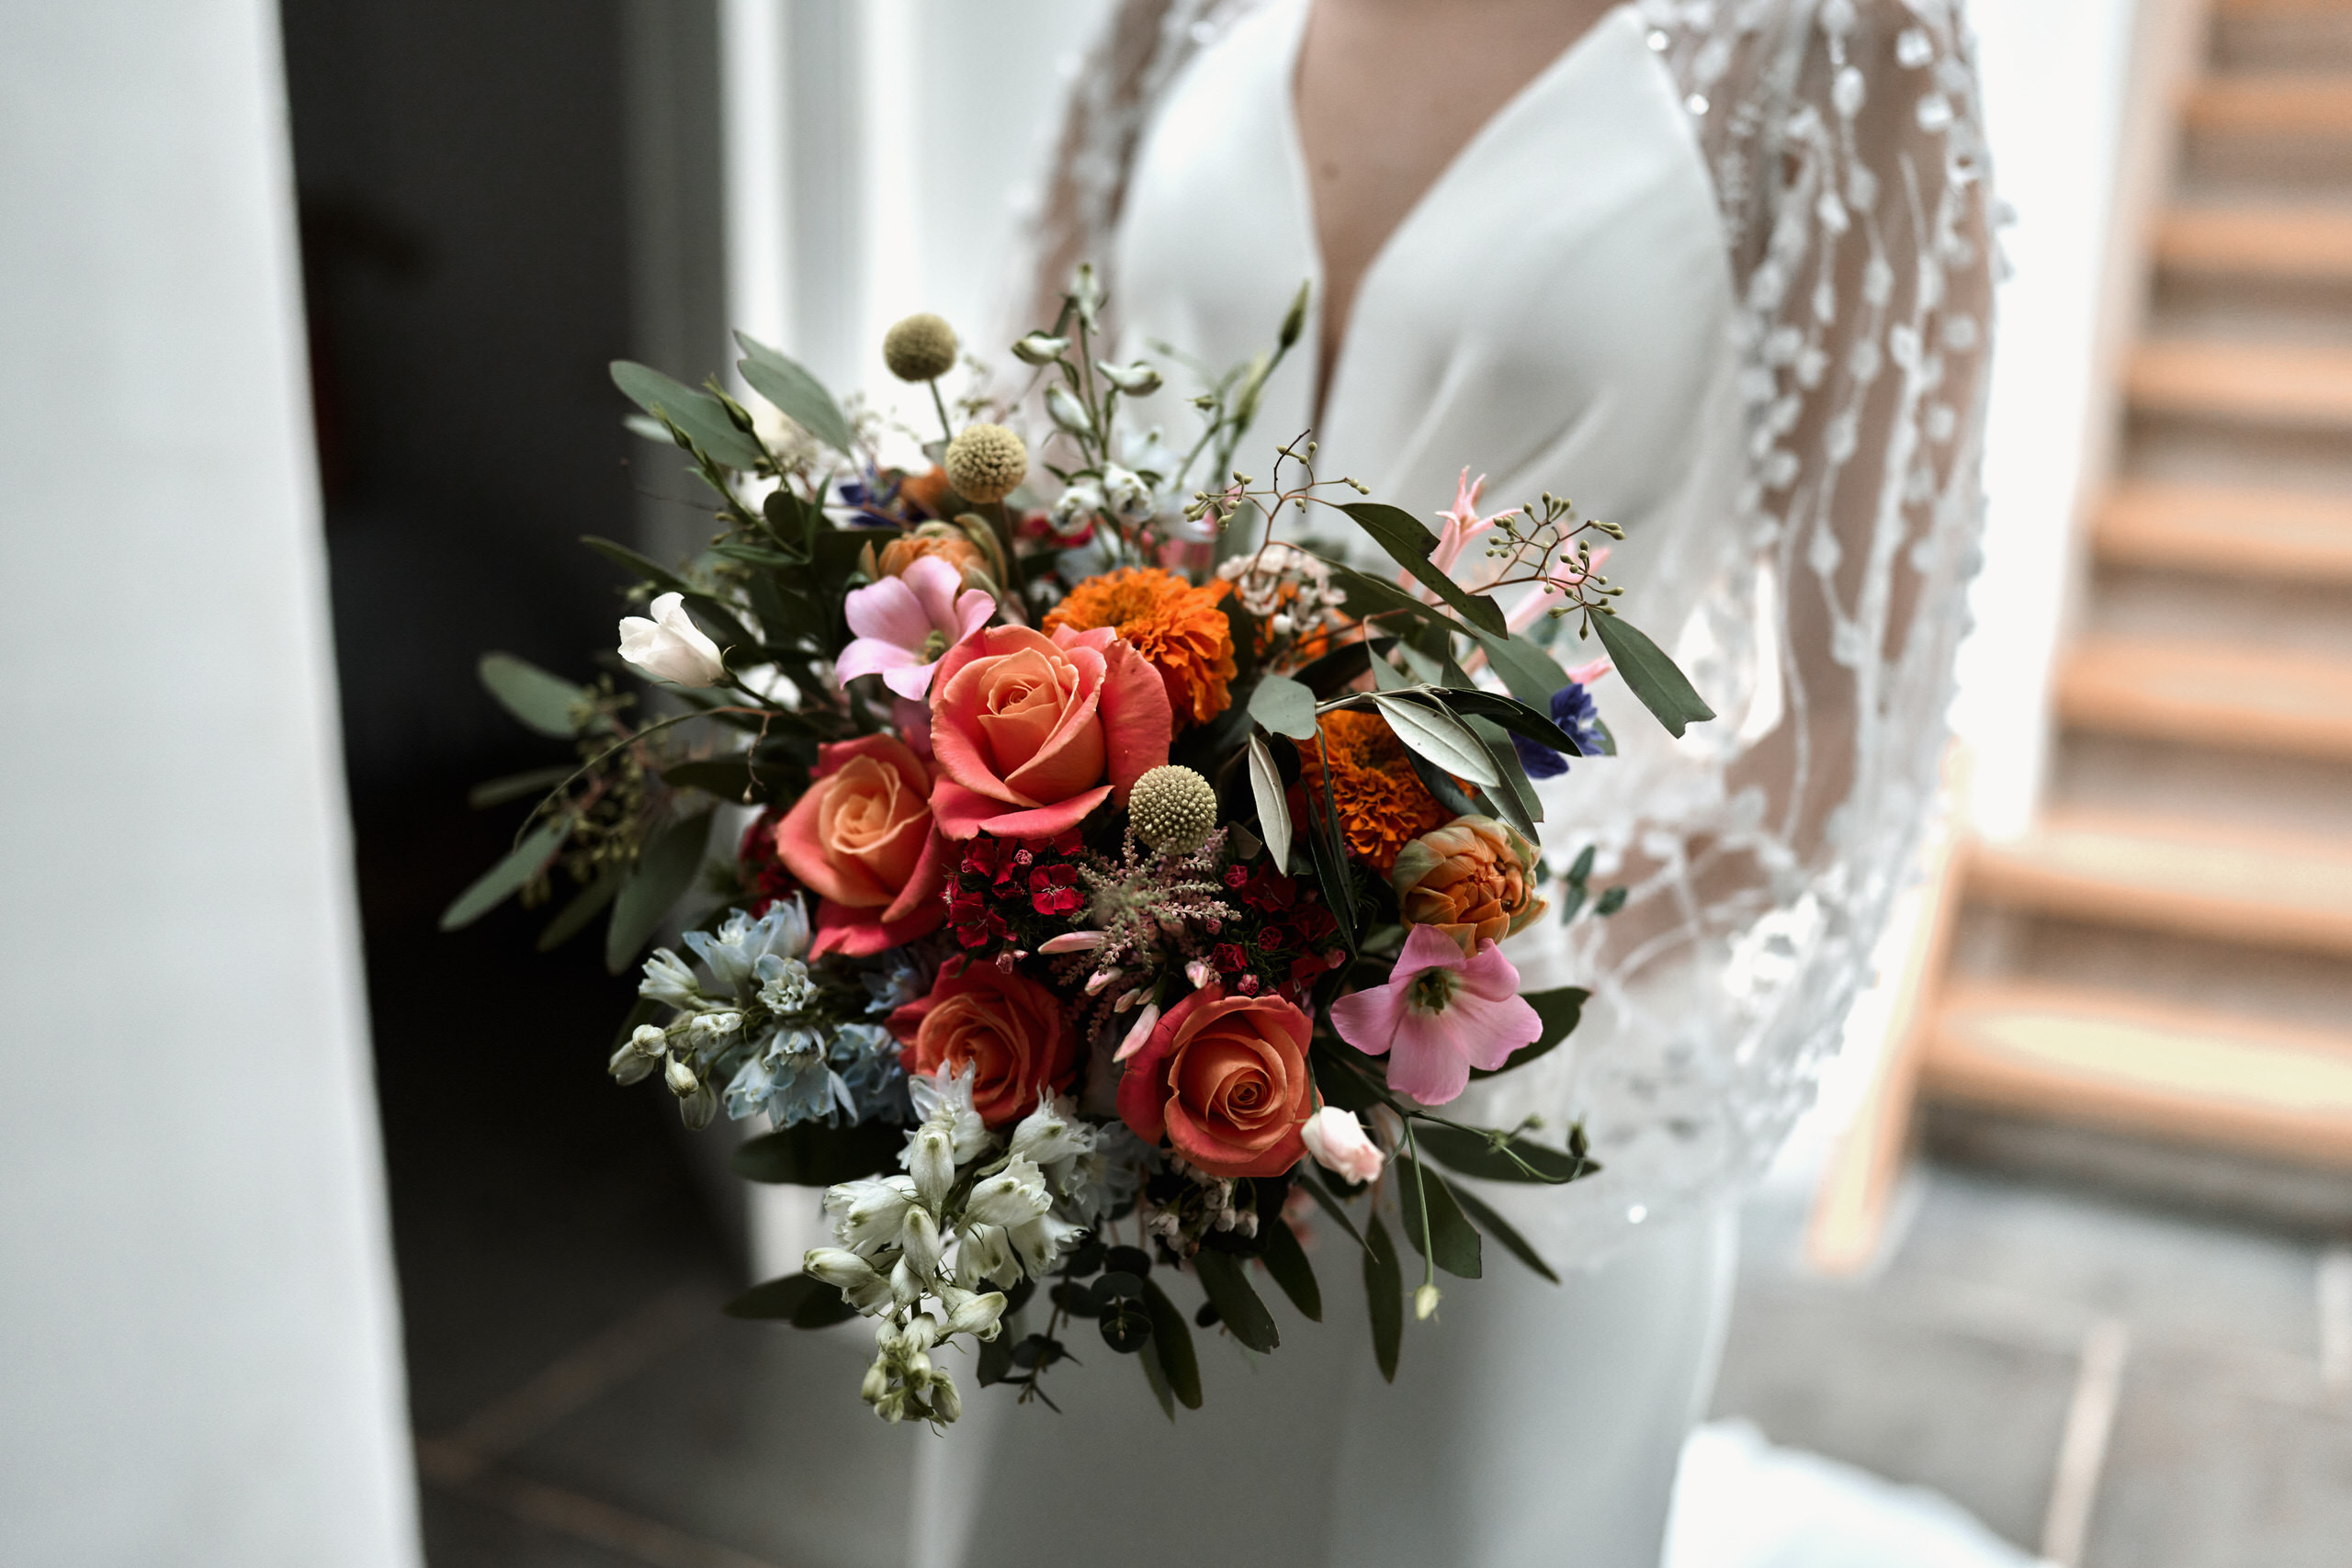 A woman is holding a bunch of flowers in front of some stairs on her wedding day.